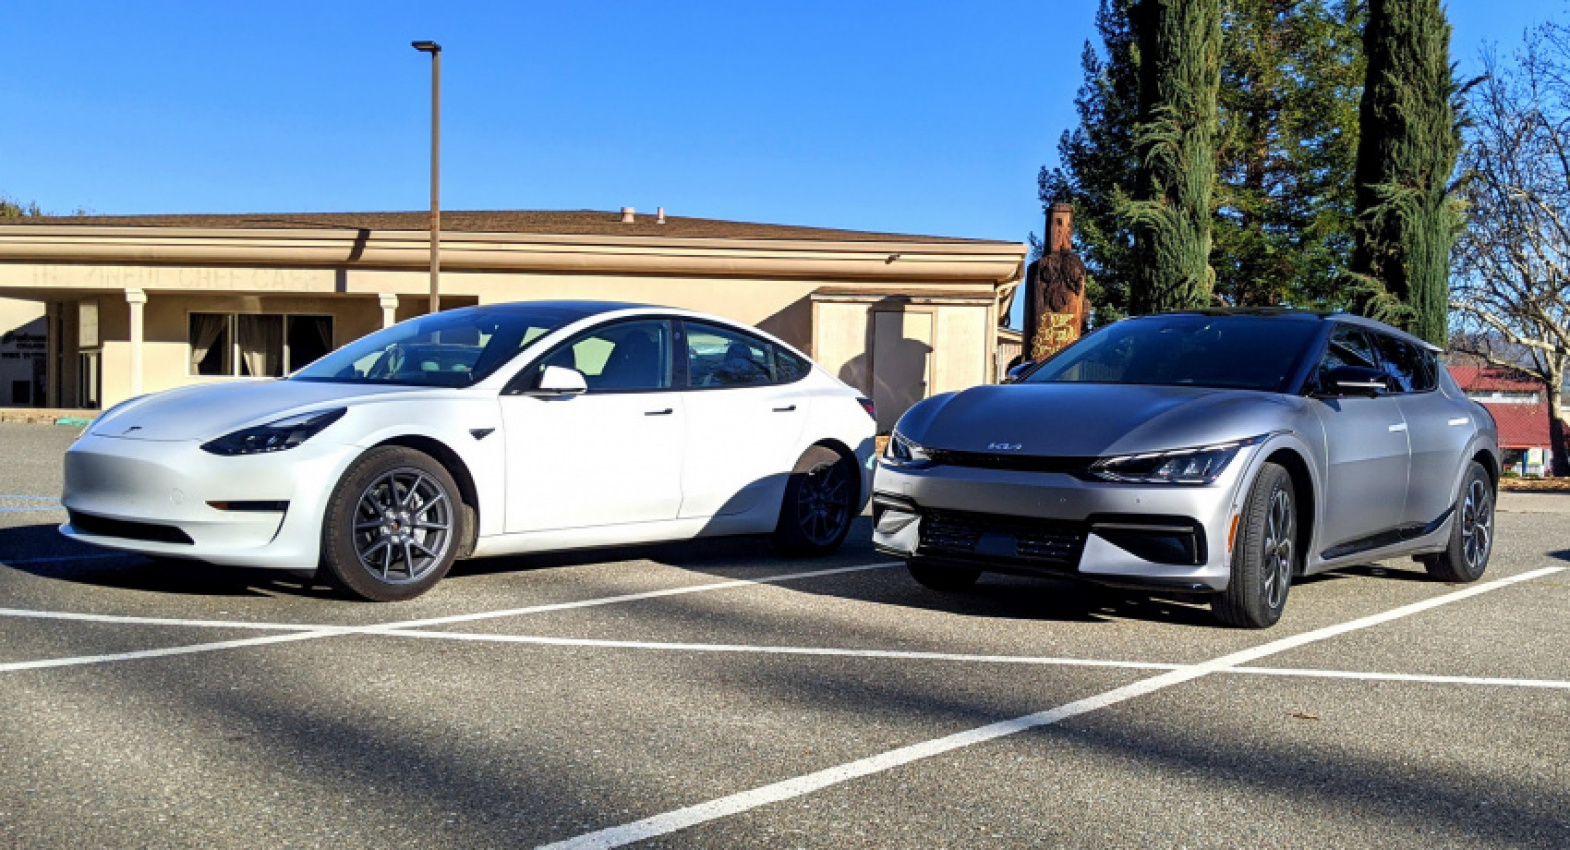 autos, cars, kia, news, tesla, android, comparison, electric vehicles, feature, galleries, kia ev6, tesla model 3, tesla model y, android, check out the new kia ev6 next to a tesla model 3 and see how they compare